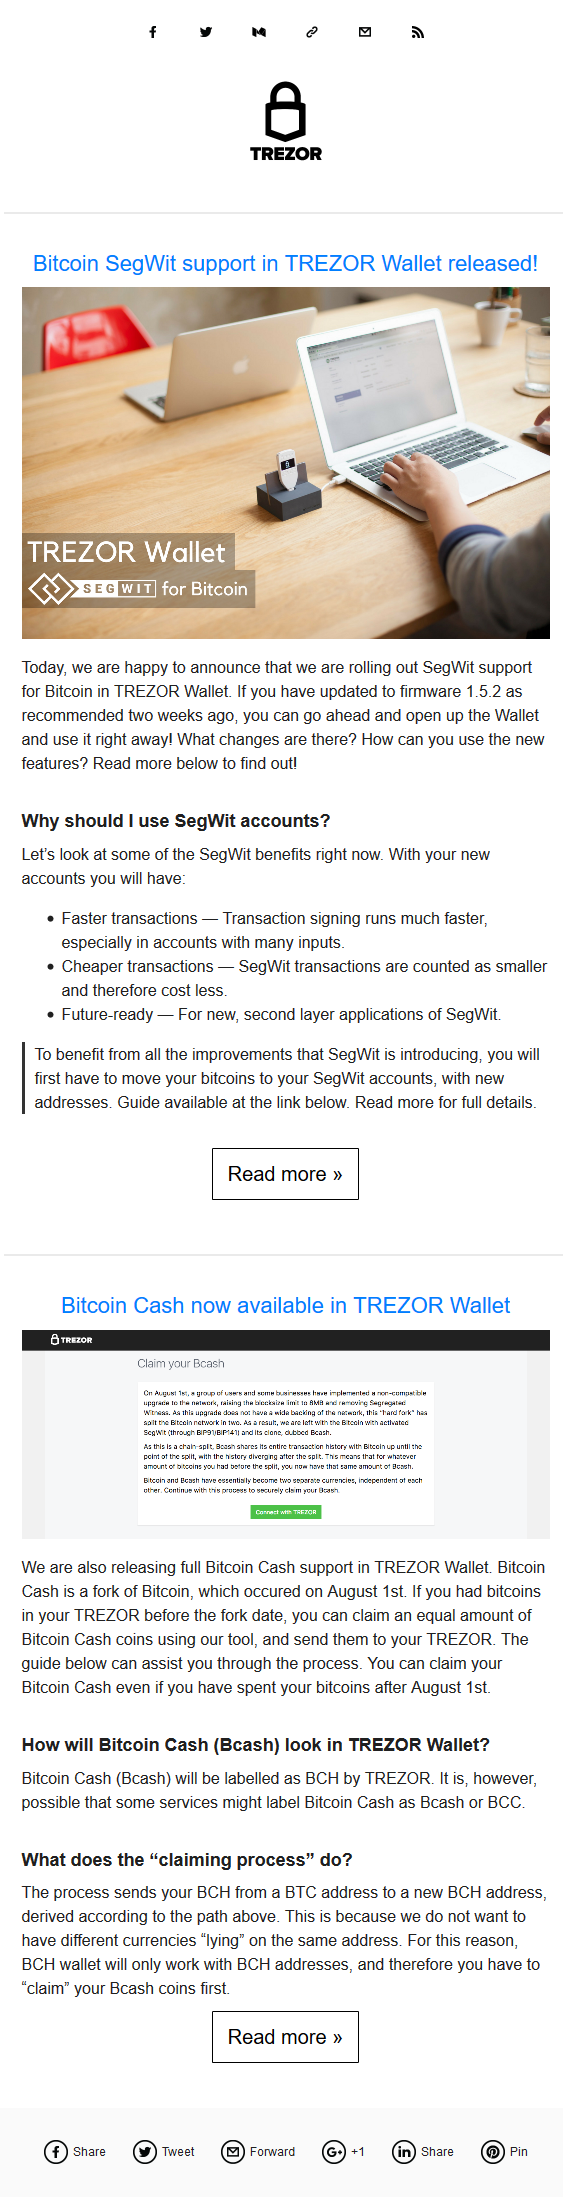 Gmail - Your new SegWit accounts are ready! — TREZOR Security.png